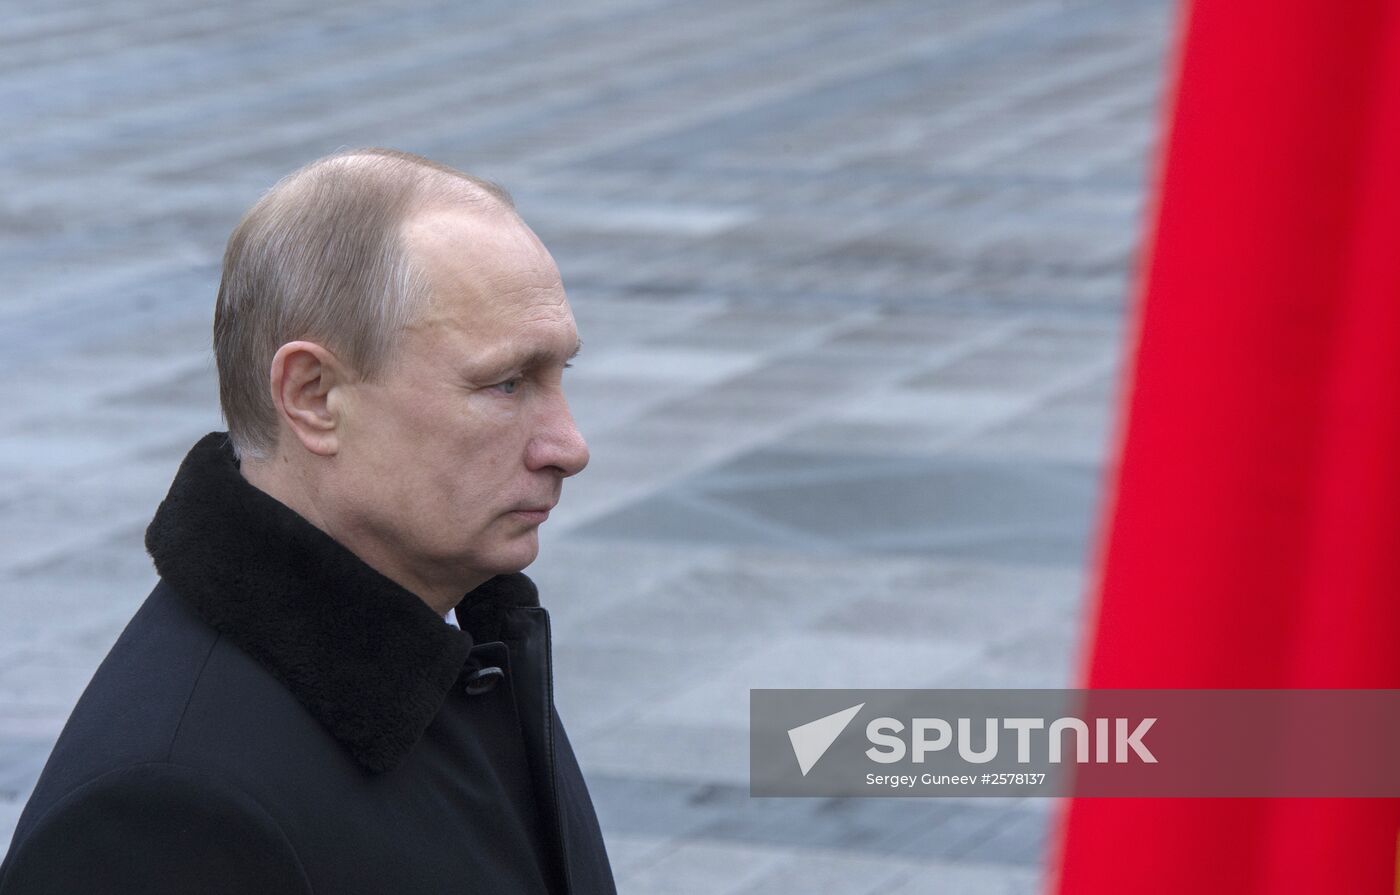 Russian President Vladimir Putin and Prime Minister Dmitry Medvedev lay wreath at Unknown Soldier's Tomb